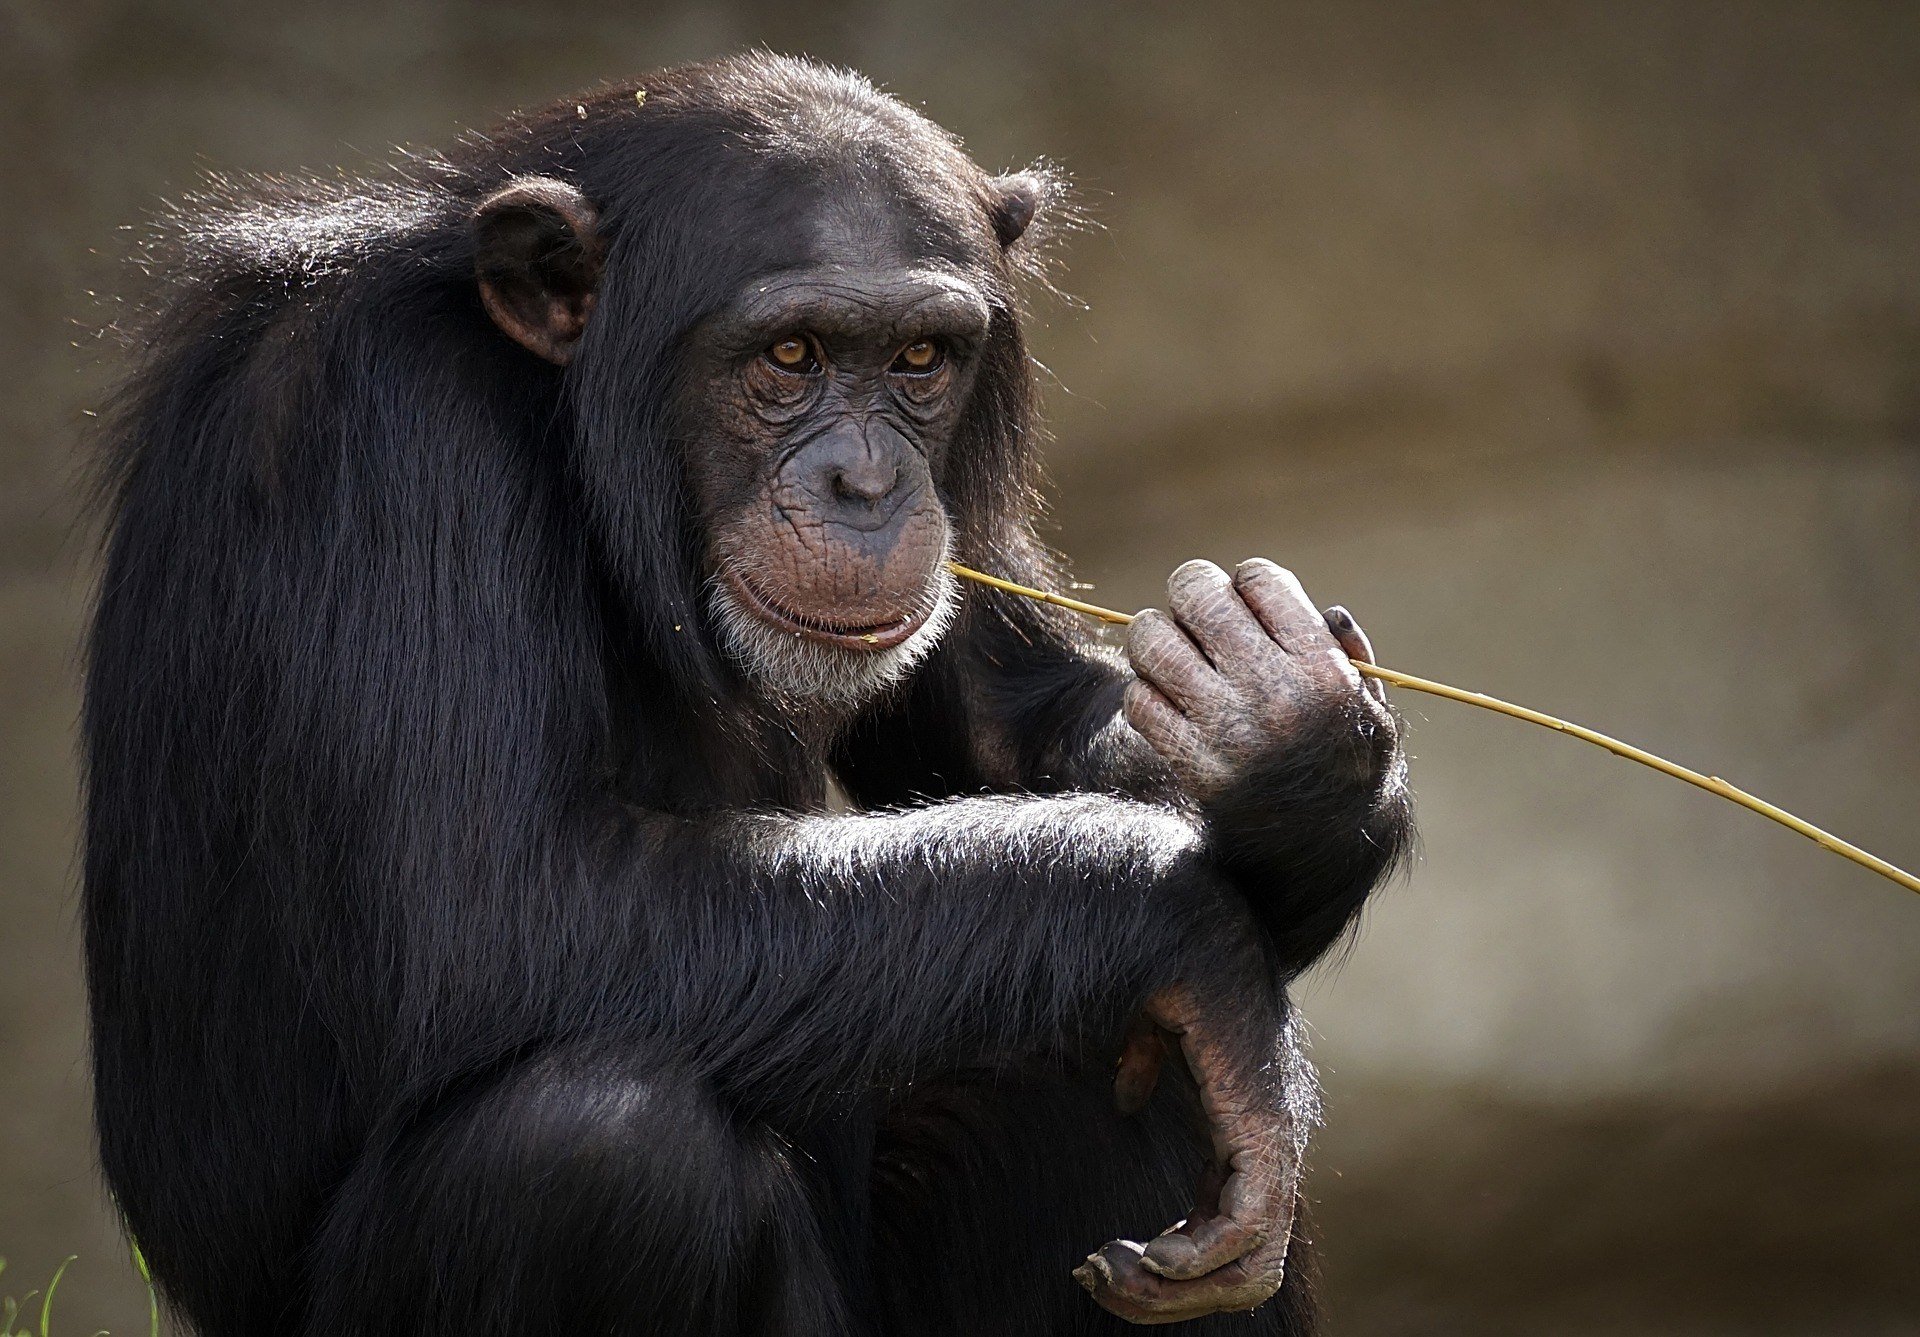 Numerous attempts have been made to teach chimpanzees to speak